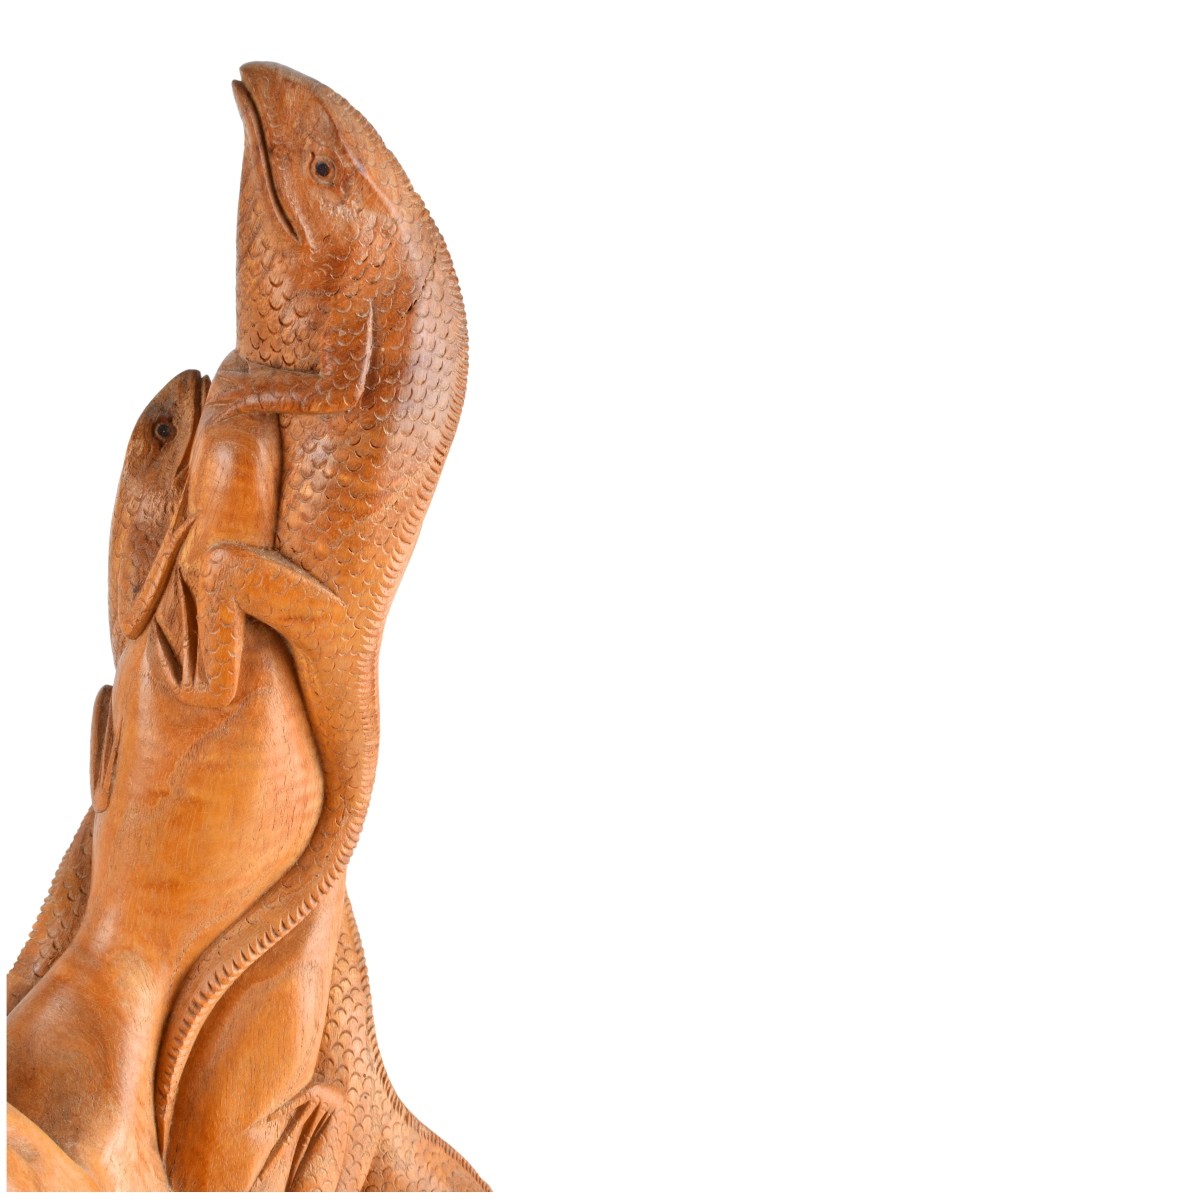 Two (2) Carved Wood Lizard Sculptures